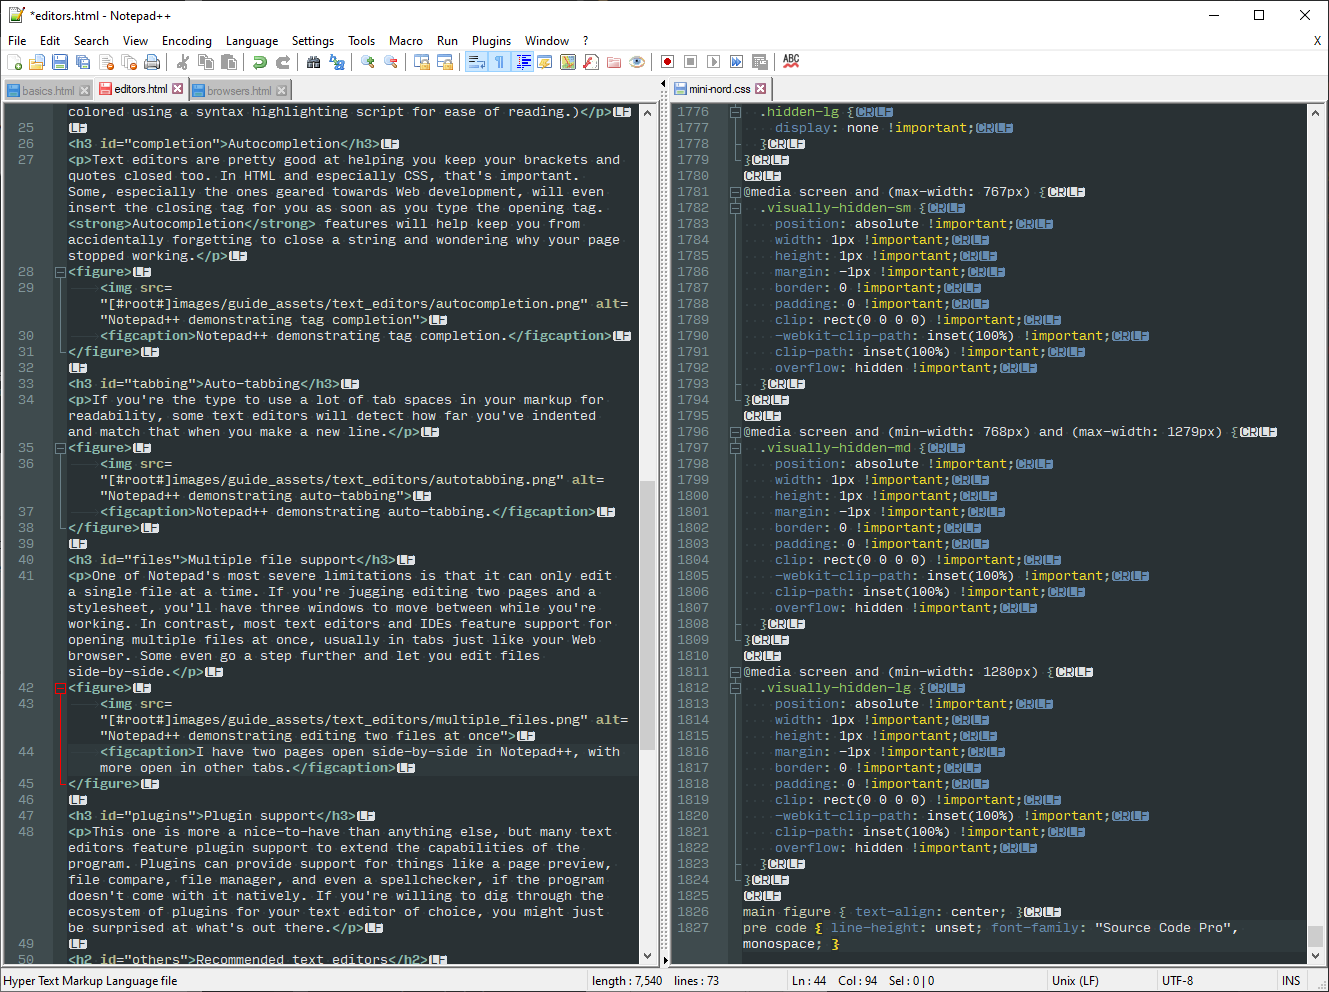 Notepad++ demonstrating editing two files at once